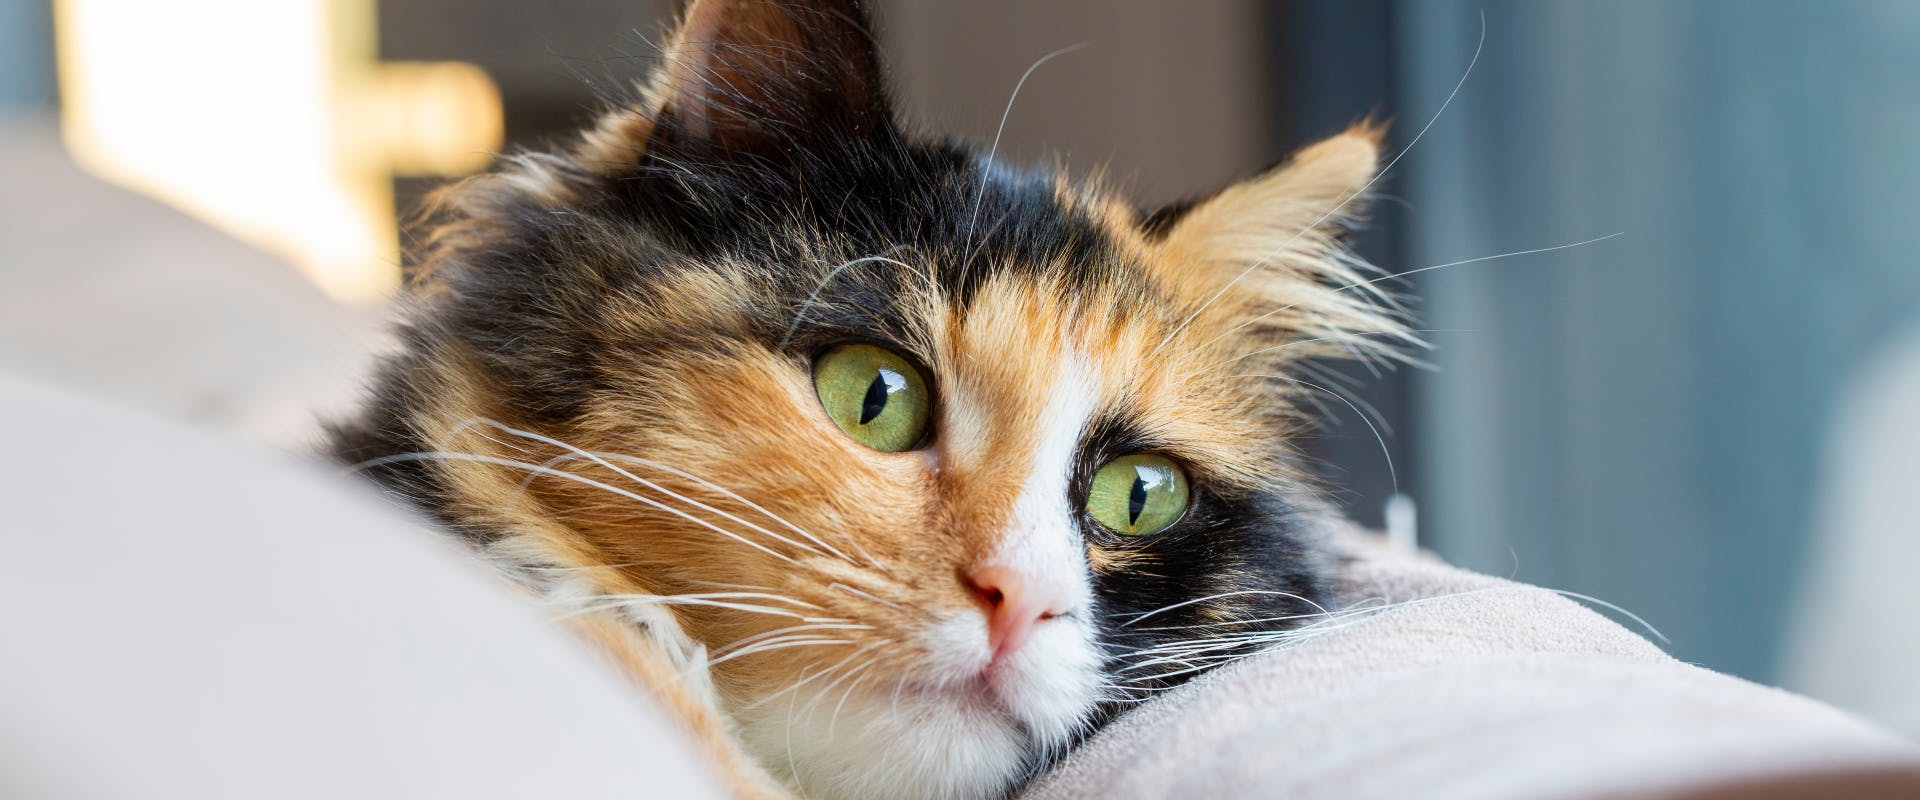 calico cat with green eyes lying on a soft blanket